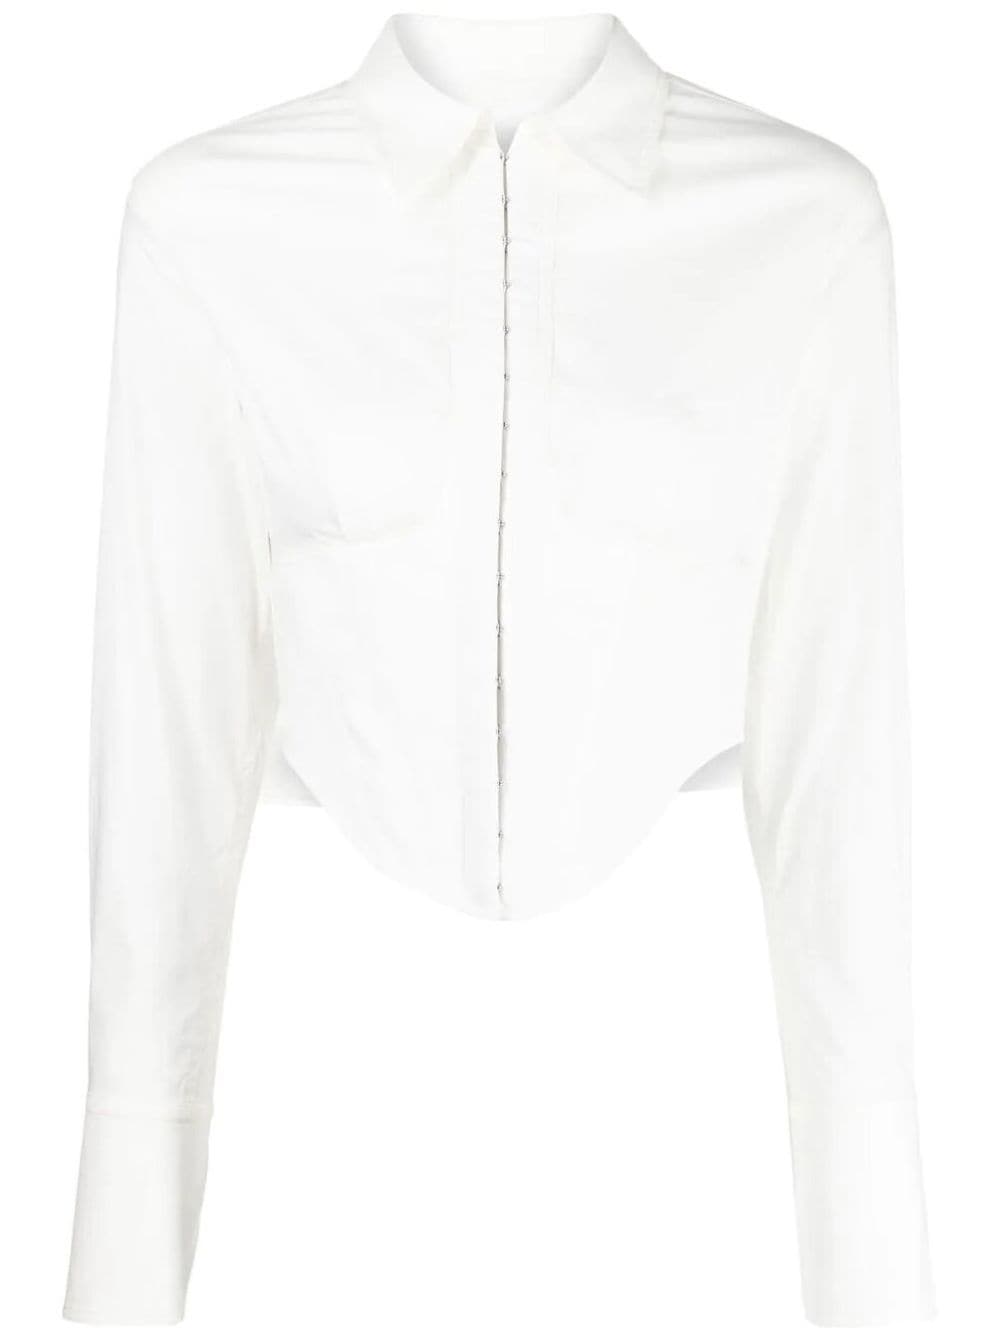 DION LEE CORSET-STYLE DARTED SHIRT